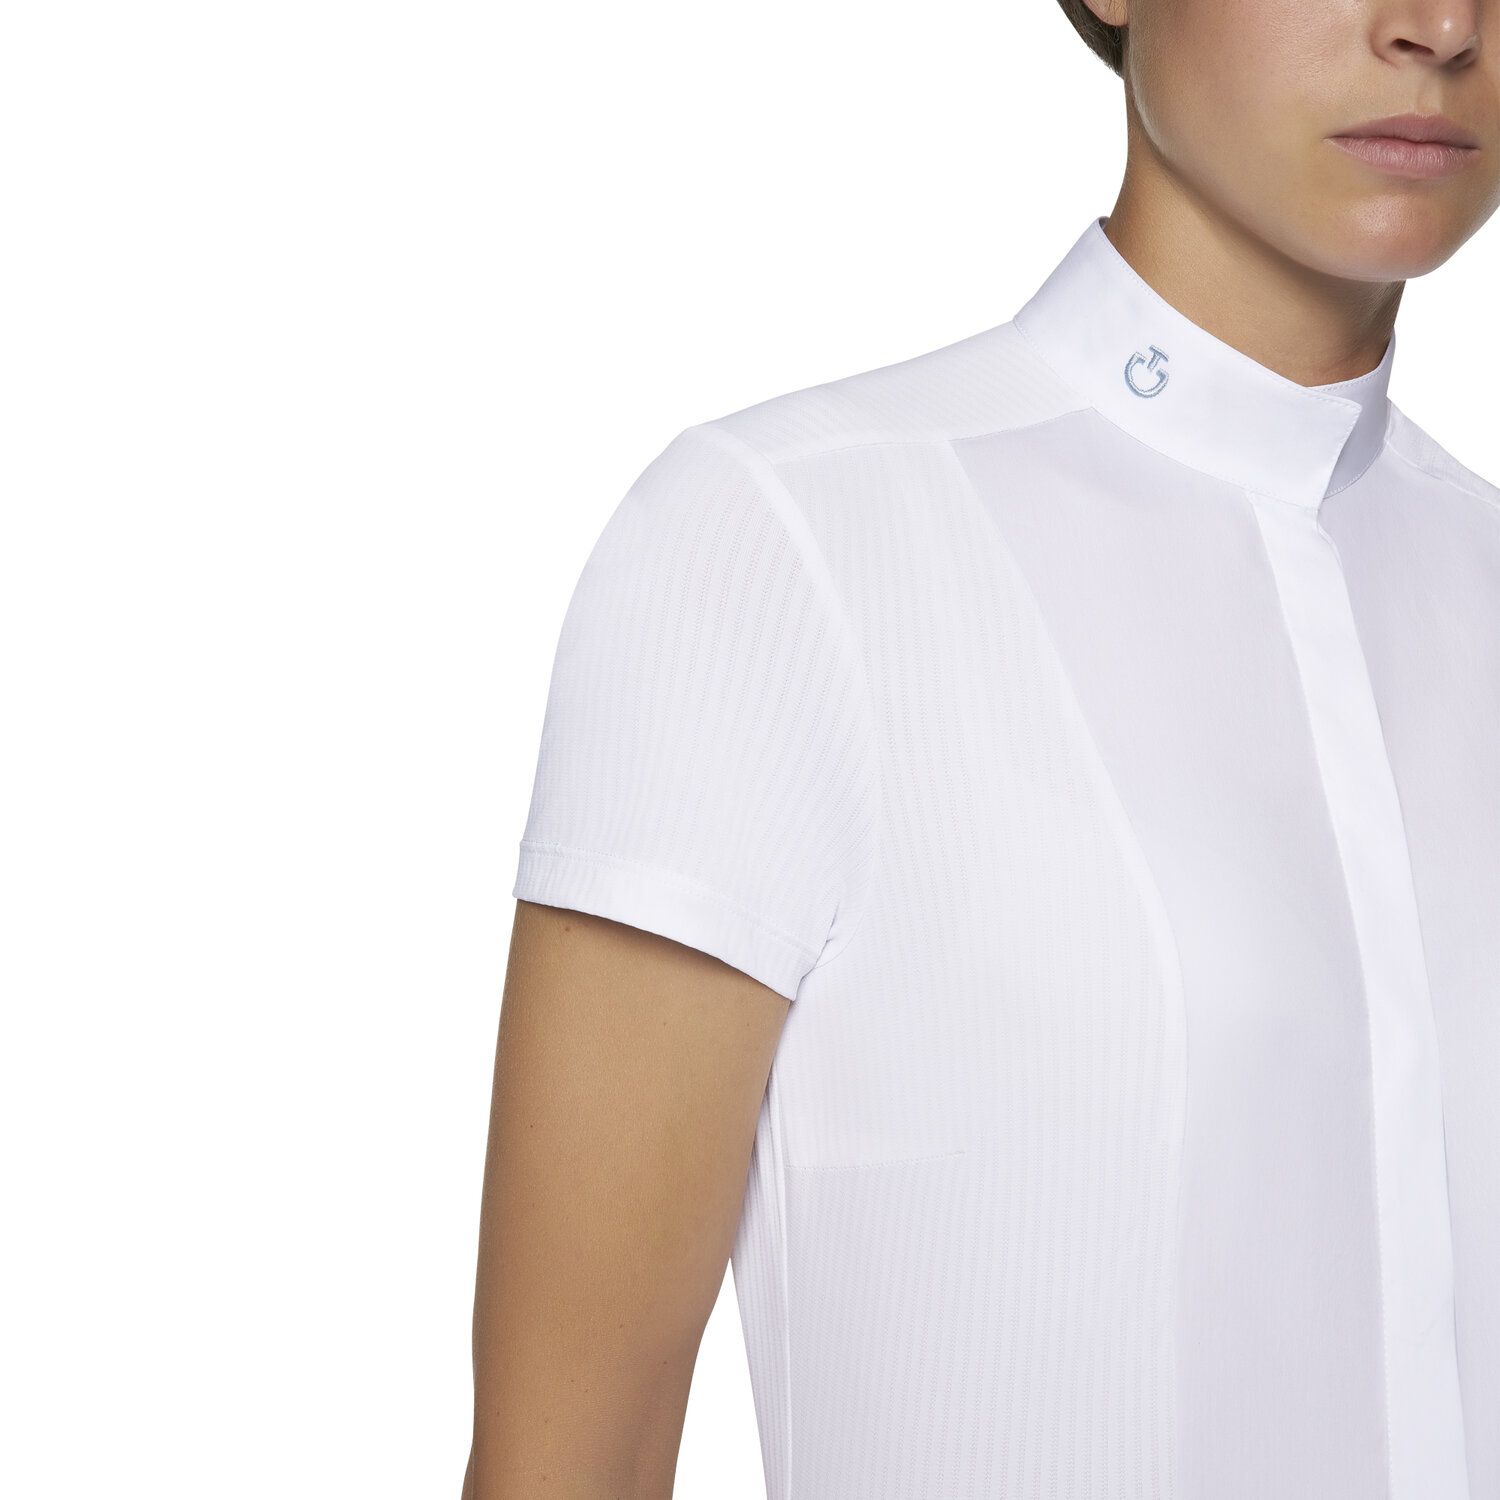 Cavalleria Toscana Women's micro perforated short-sleeved shirt WHITE/KNIT-4